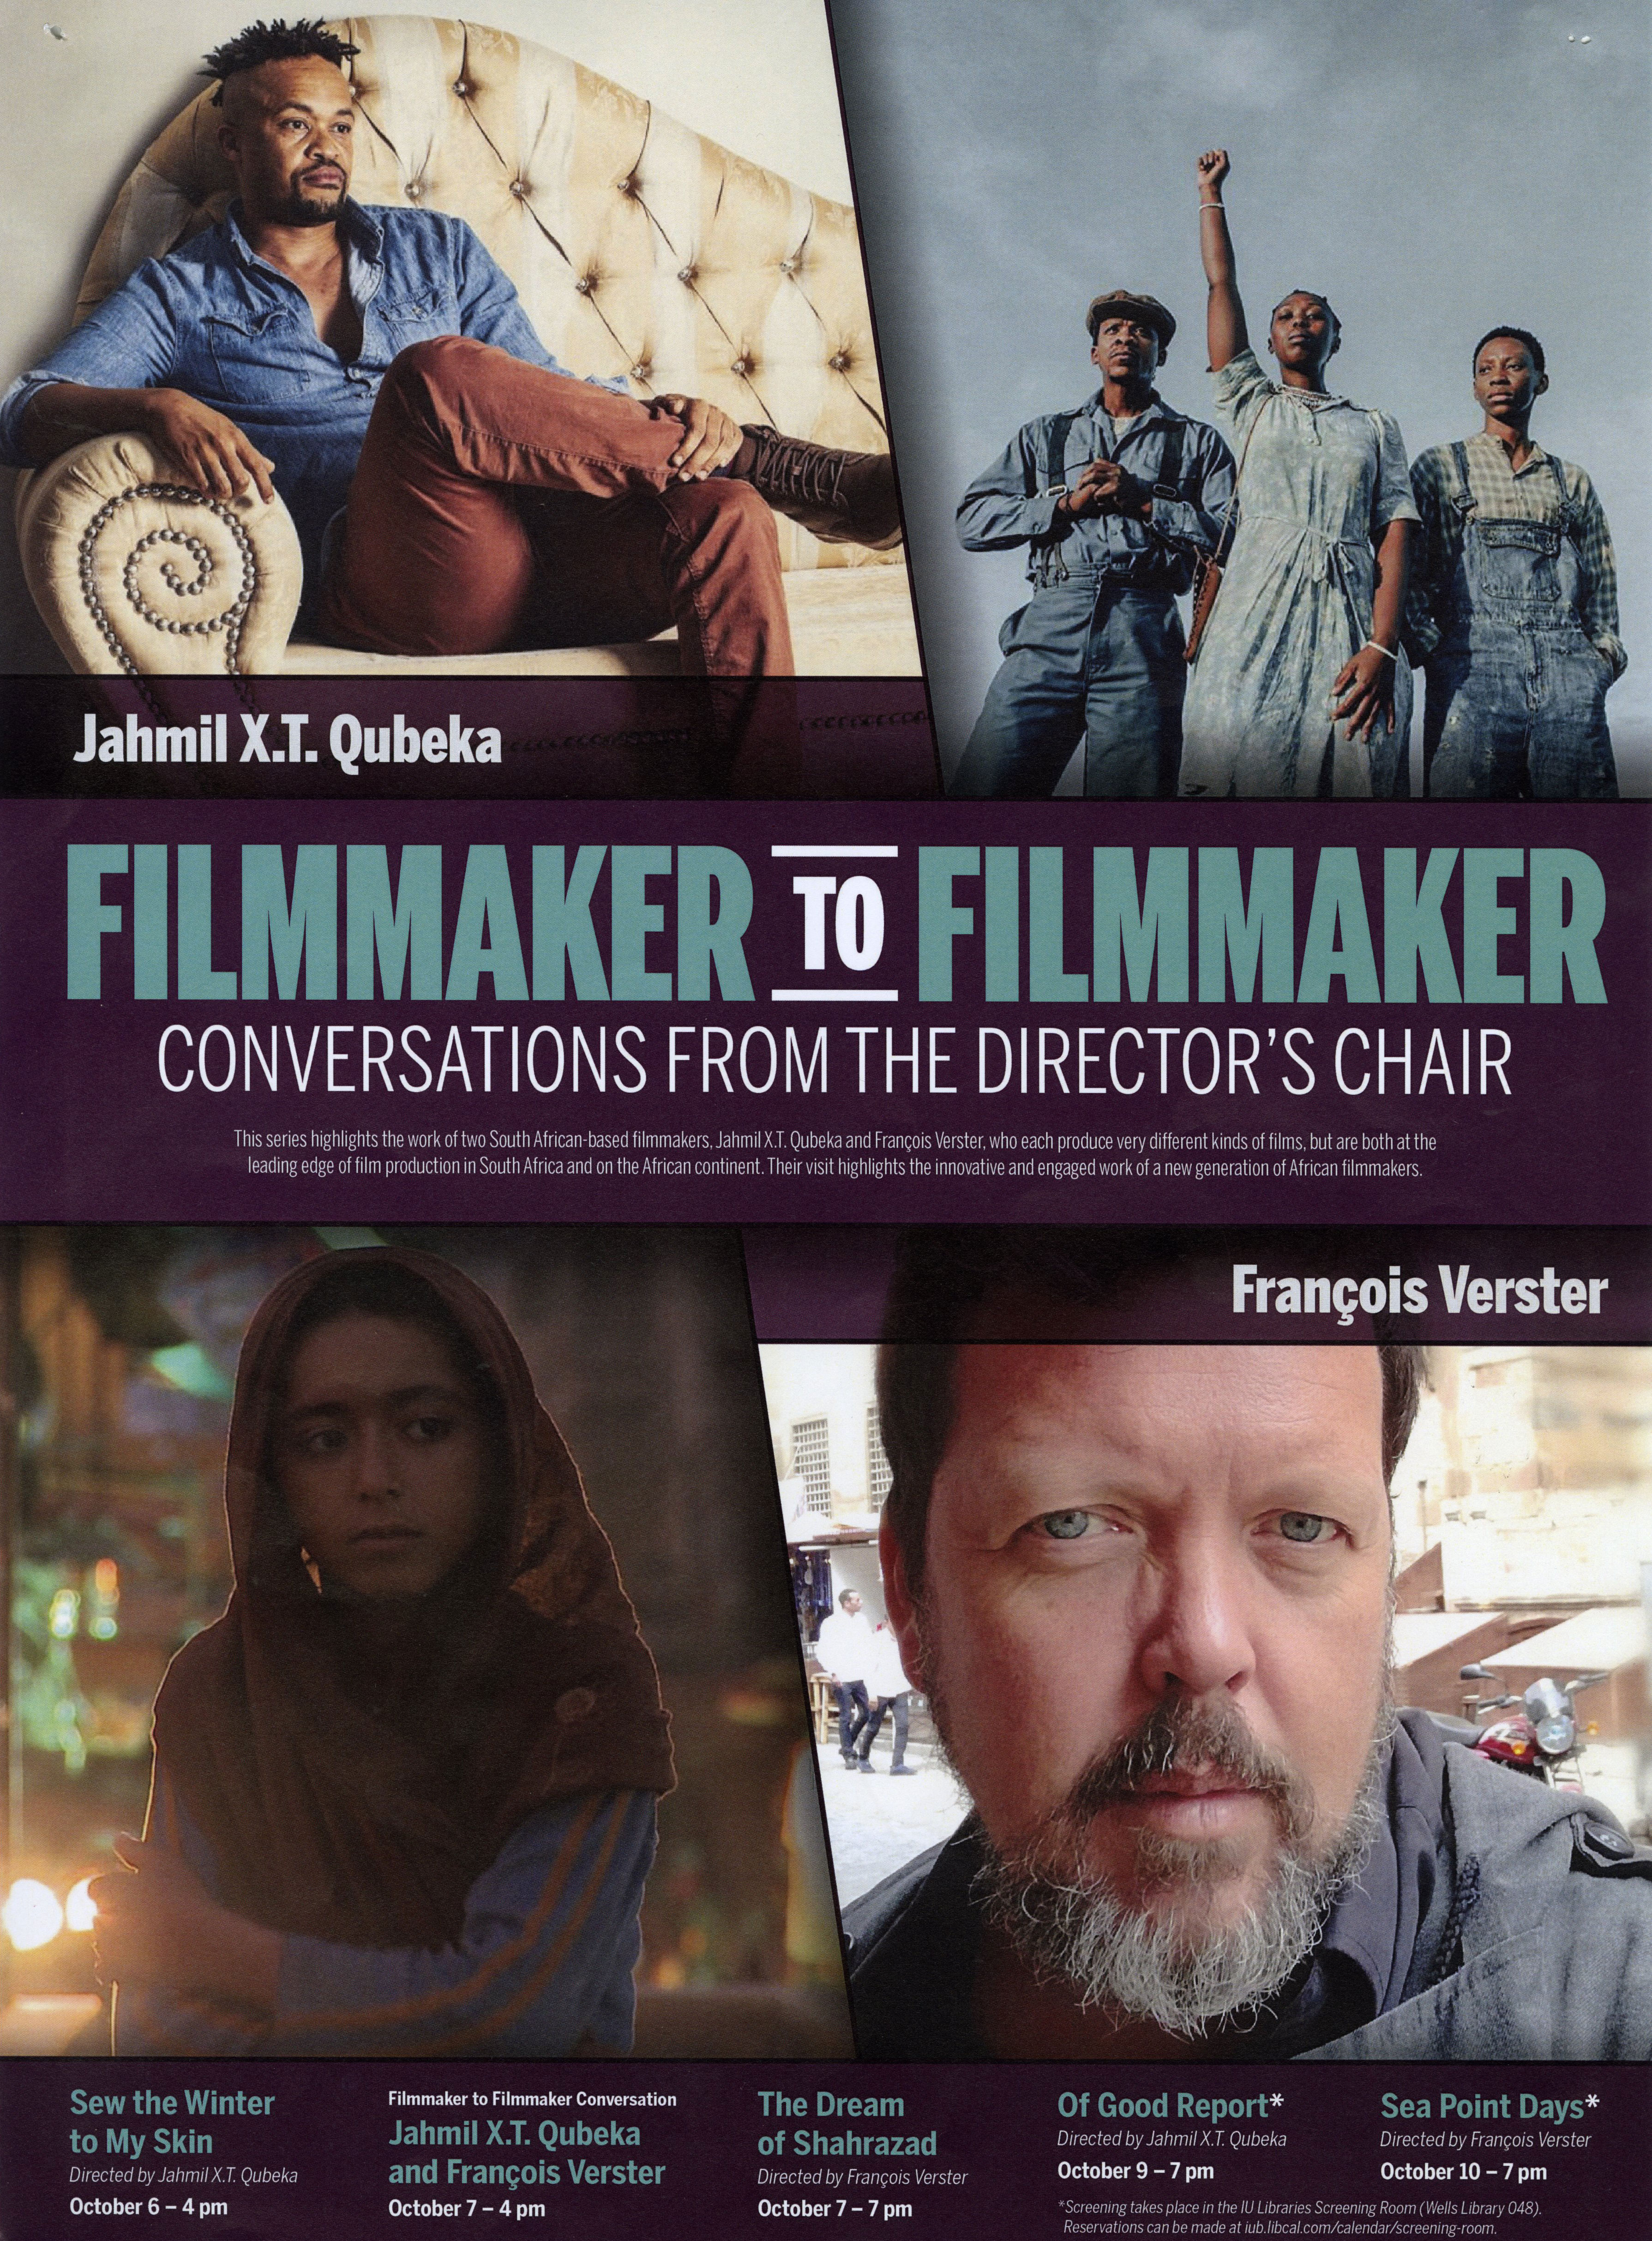 A movie poster featuring four images. The top left image is Jahmil X.T. Qubeka sitting on a couch. The top right image is three people dressed in blue standing outside. The woman in the middle has a fist raised to the sky. The bottom left image is a woman wearing a head scarf. The bottom right image is a headshot of Francois Verster, taken outdoors on a streetscape.  The text says: Jahmil X.T. Qubeka. Francois Verster. Filmmaker to filmmaker: Conversations from the Director's Chair. This series highlights the work of two South African-based filmmakers, Jahmil X.T. Qubeka and Francois Verster, who each produce very different kinds of films, but are both at the leading edge of film production in South Africa and on the African continent. Their visit highlights the innovative and engaged work of a new generation of African filmmakers. Sew the Winter to My Skin: Directed by Jahmil X.T. Qubeka. October 6 - 4 pm Filmmaker to Filmmaker Conversation: Jamil X.T. Qubeka and Francois Verster. October 7 - 4 pm The Dream of Shahrazad. Directed by Francois Verster. October 7 - 7pm Of Good Report*. Directed by Jahmil X.T. Qubeka. October 9 - 7 pm Sea Point Days". Directed by Francois Verster. Octoebr 10 - 7 pm *Screening takes place in the IU Libraries Screening Room (Wells Library 048). Reservations can be made at iub.libcal.com/calendar/screening-room.